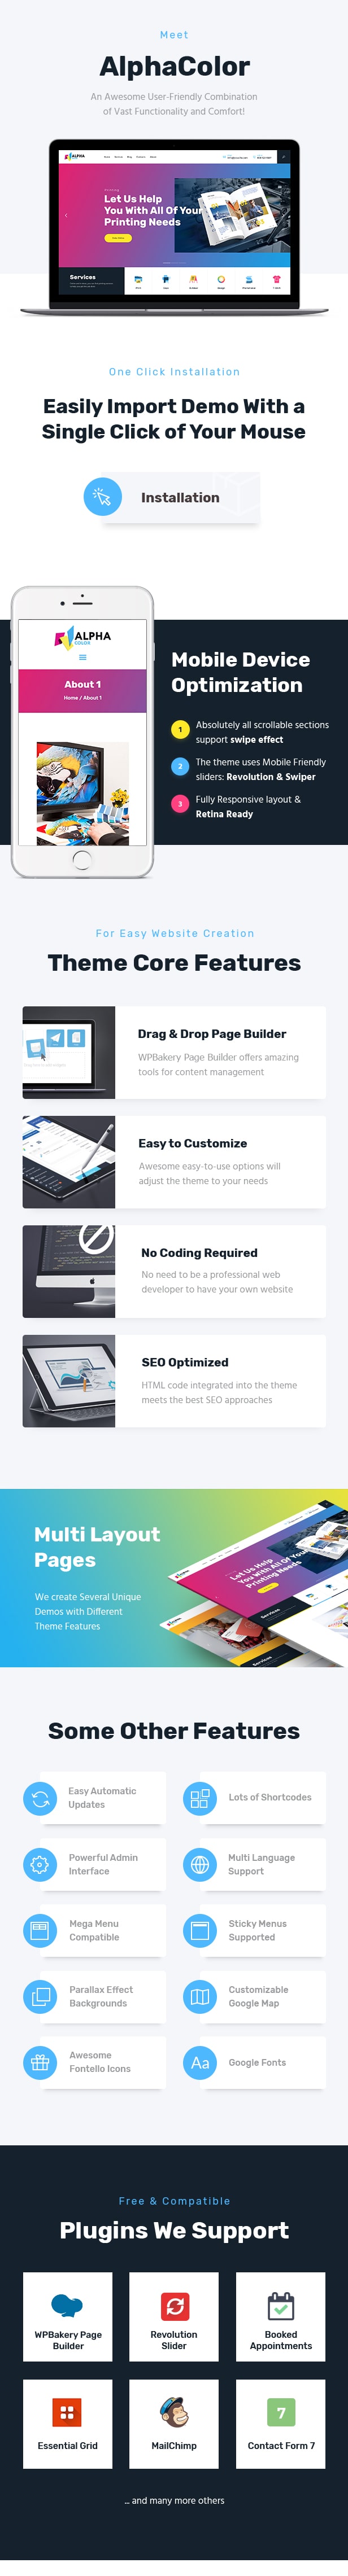 AlphaColor | Type Design Agency & 3D Printing Services WordPress Theme + Elementor - 1